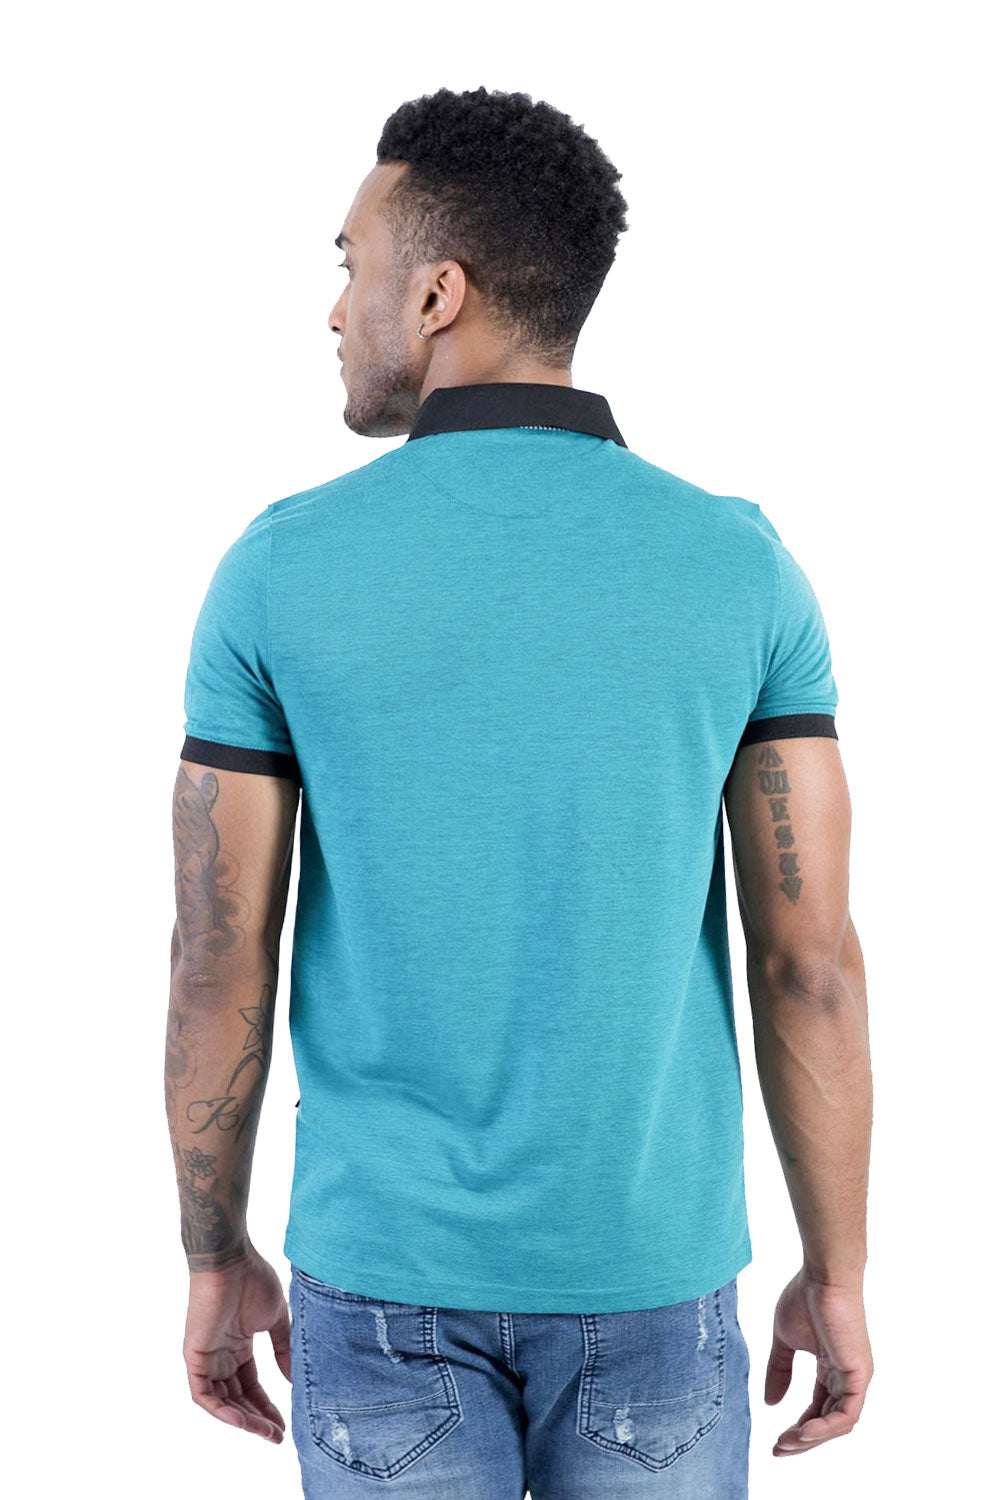 BARABAS Men's Basic Solid Color Contrasted Collar Polo Shirts PP801 Teal